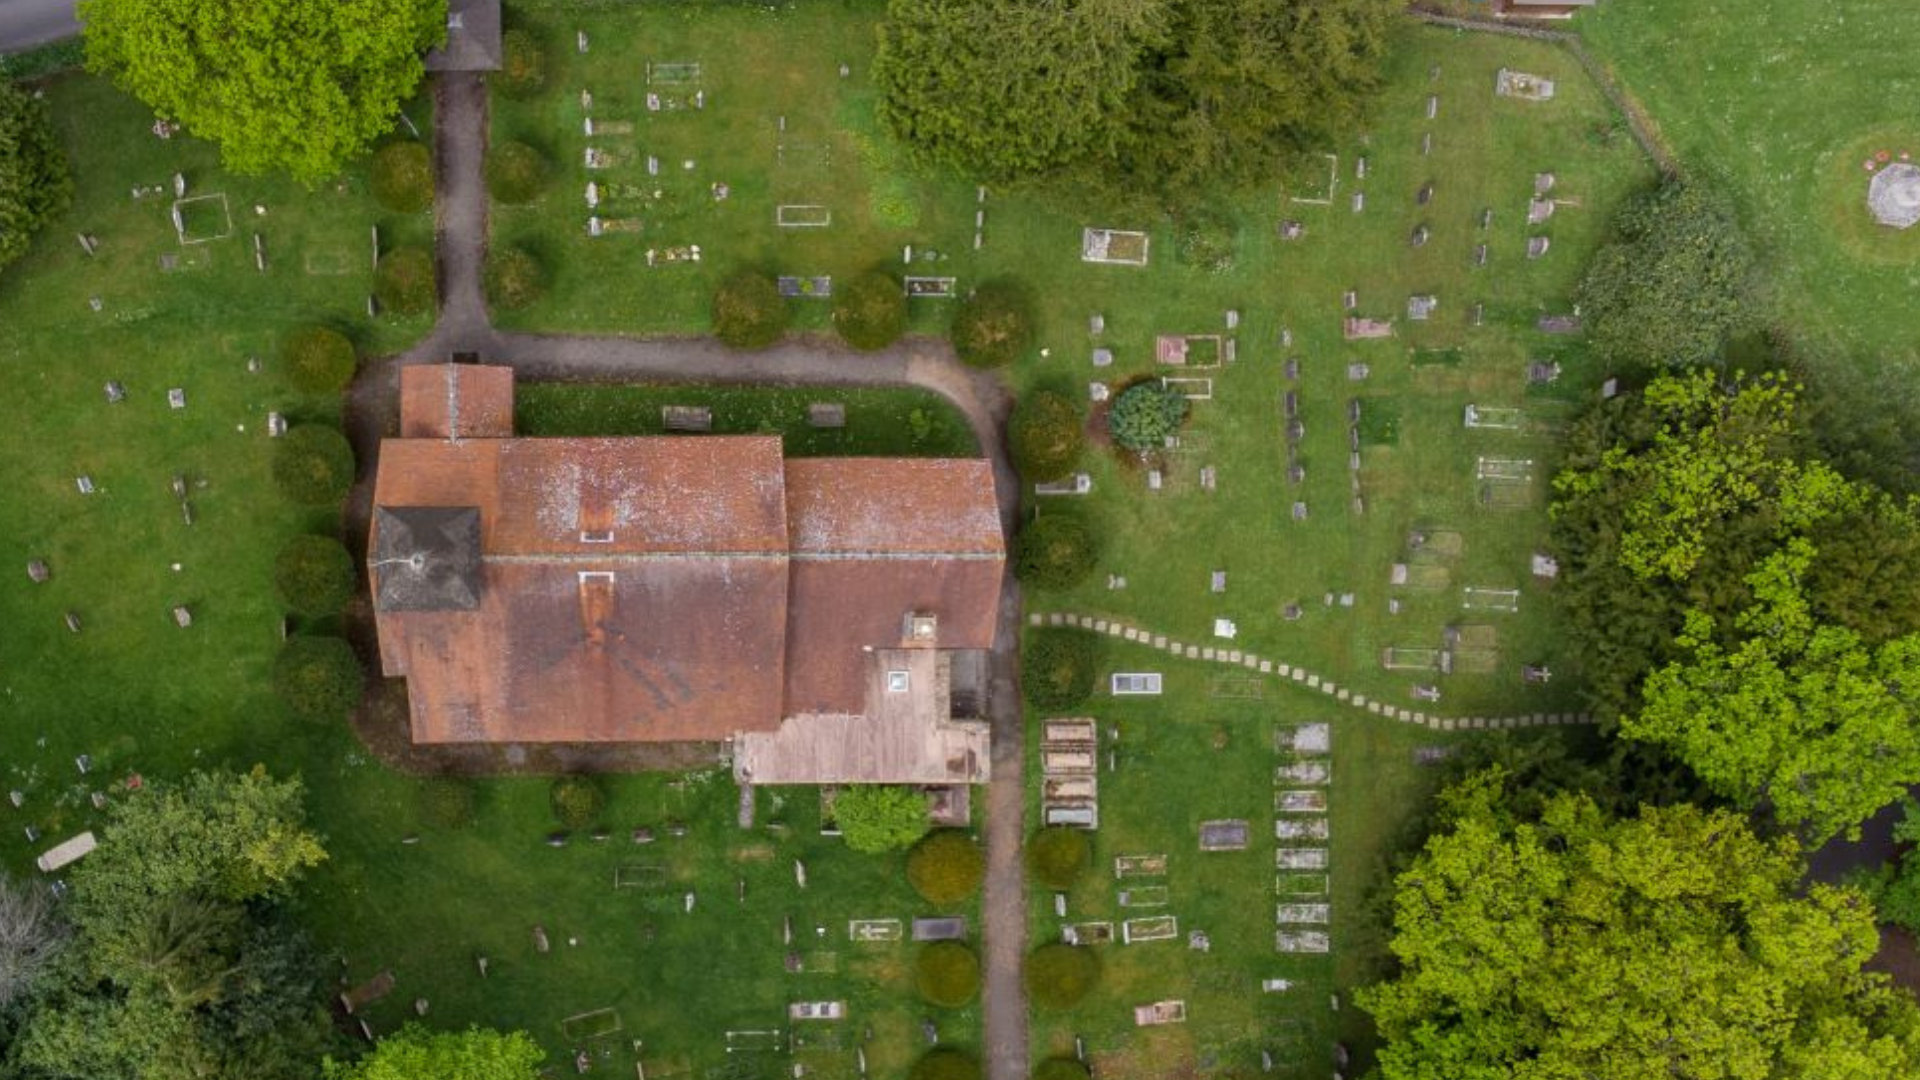 Top down view of a church roof surrounded by a churchyard, taken by a drone.